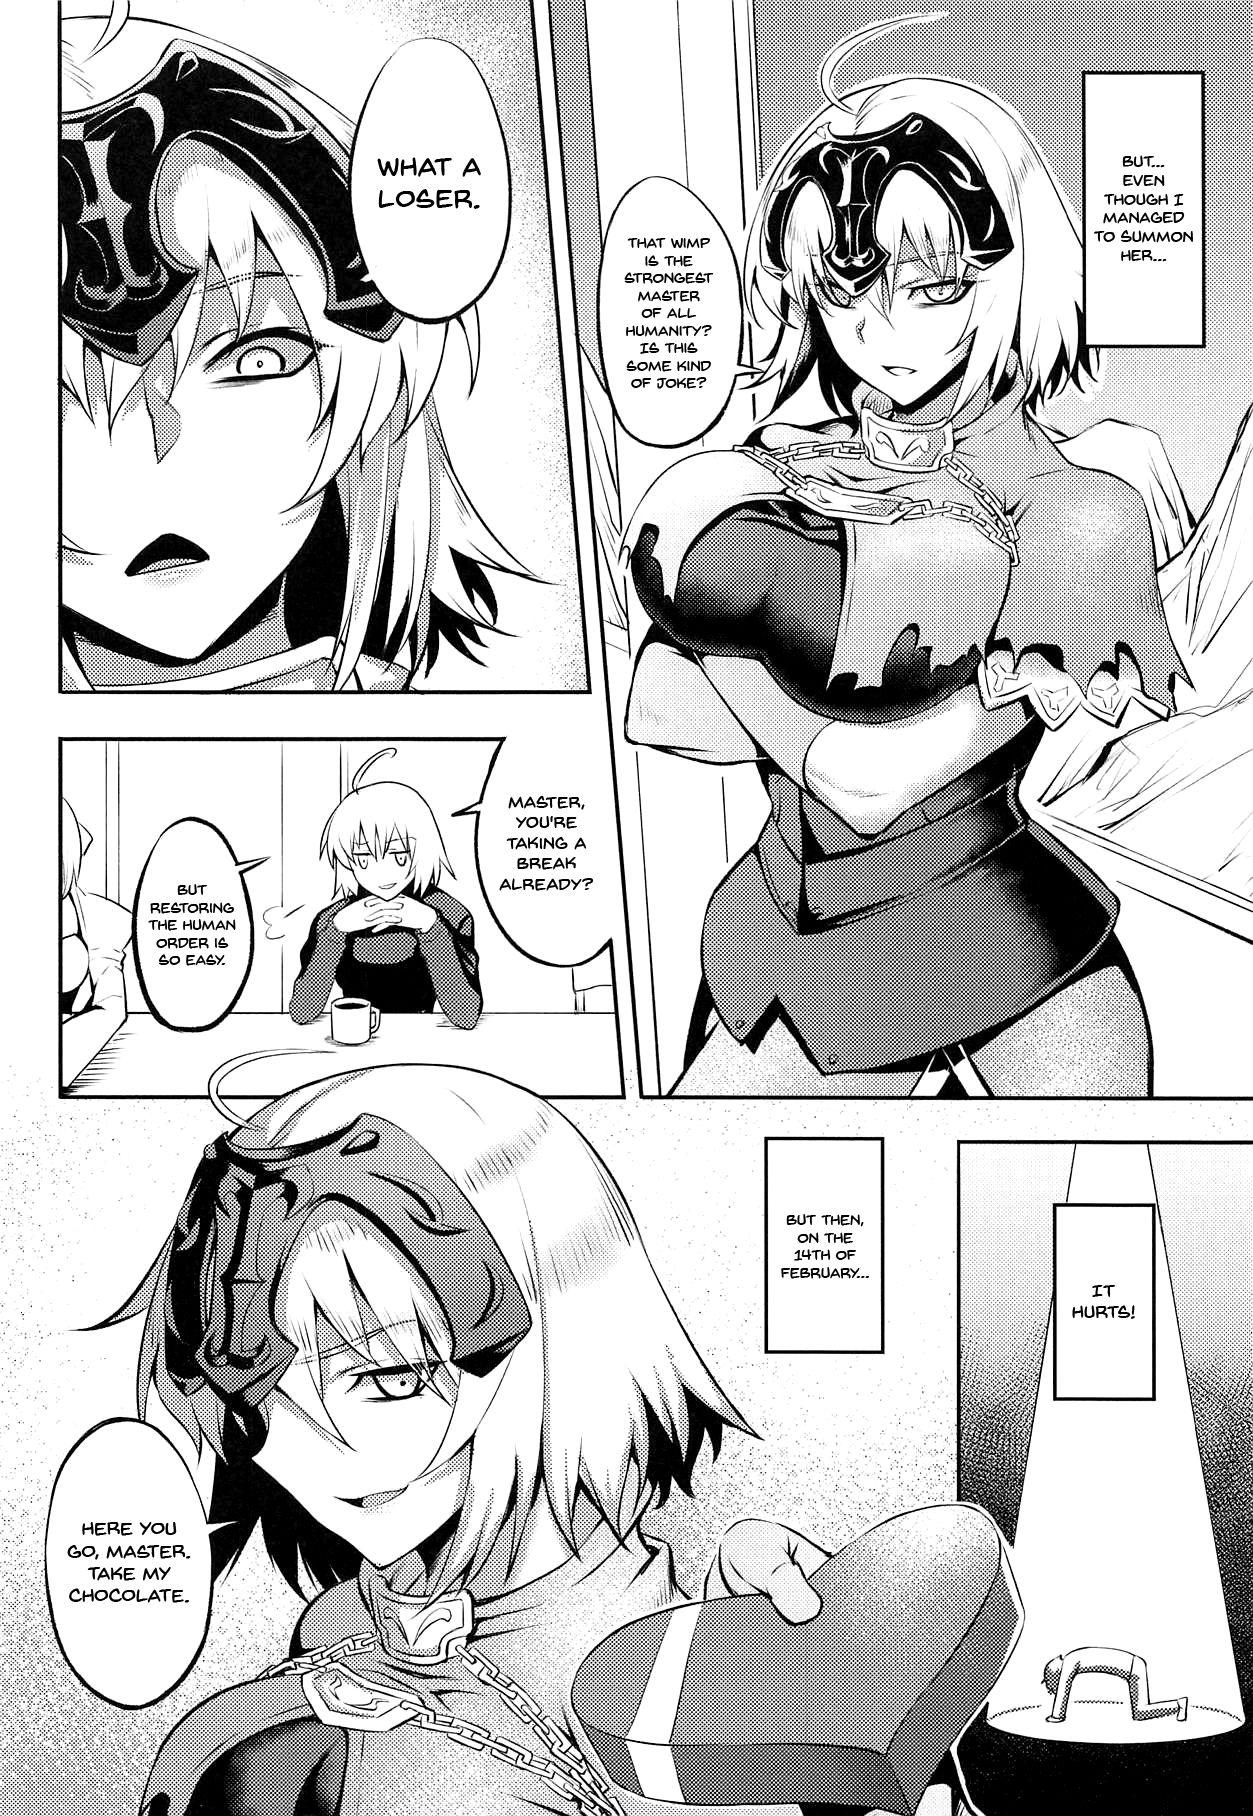 Peru Sugao no Mama no Kimi de Ite | Together With You Showing Her True Face - Fate grand order Gay Clinic - Page 4